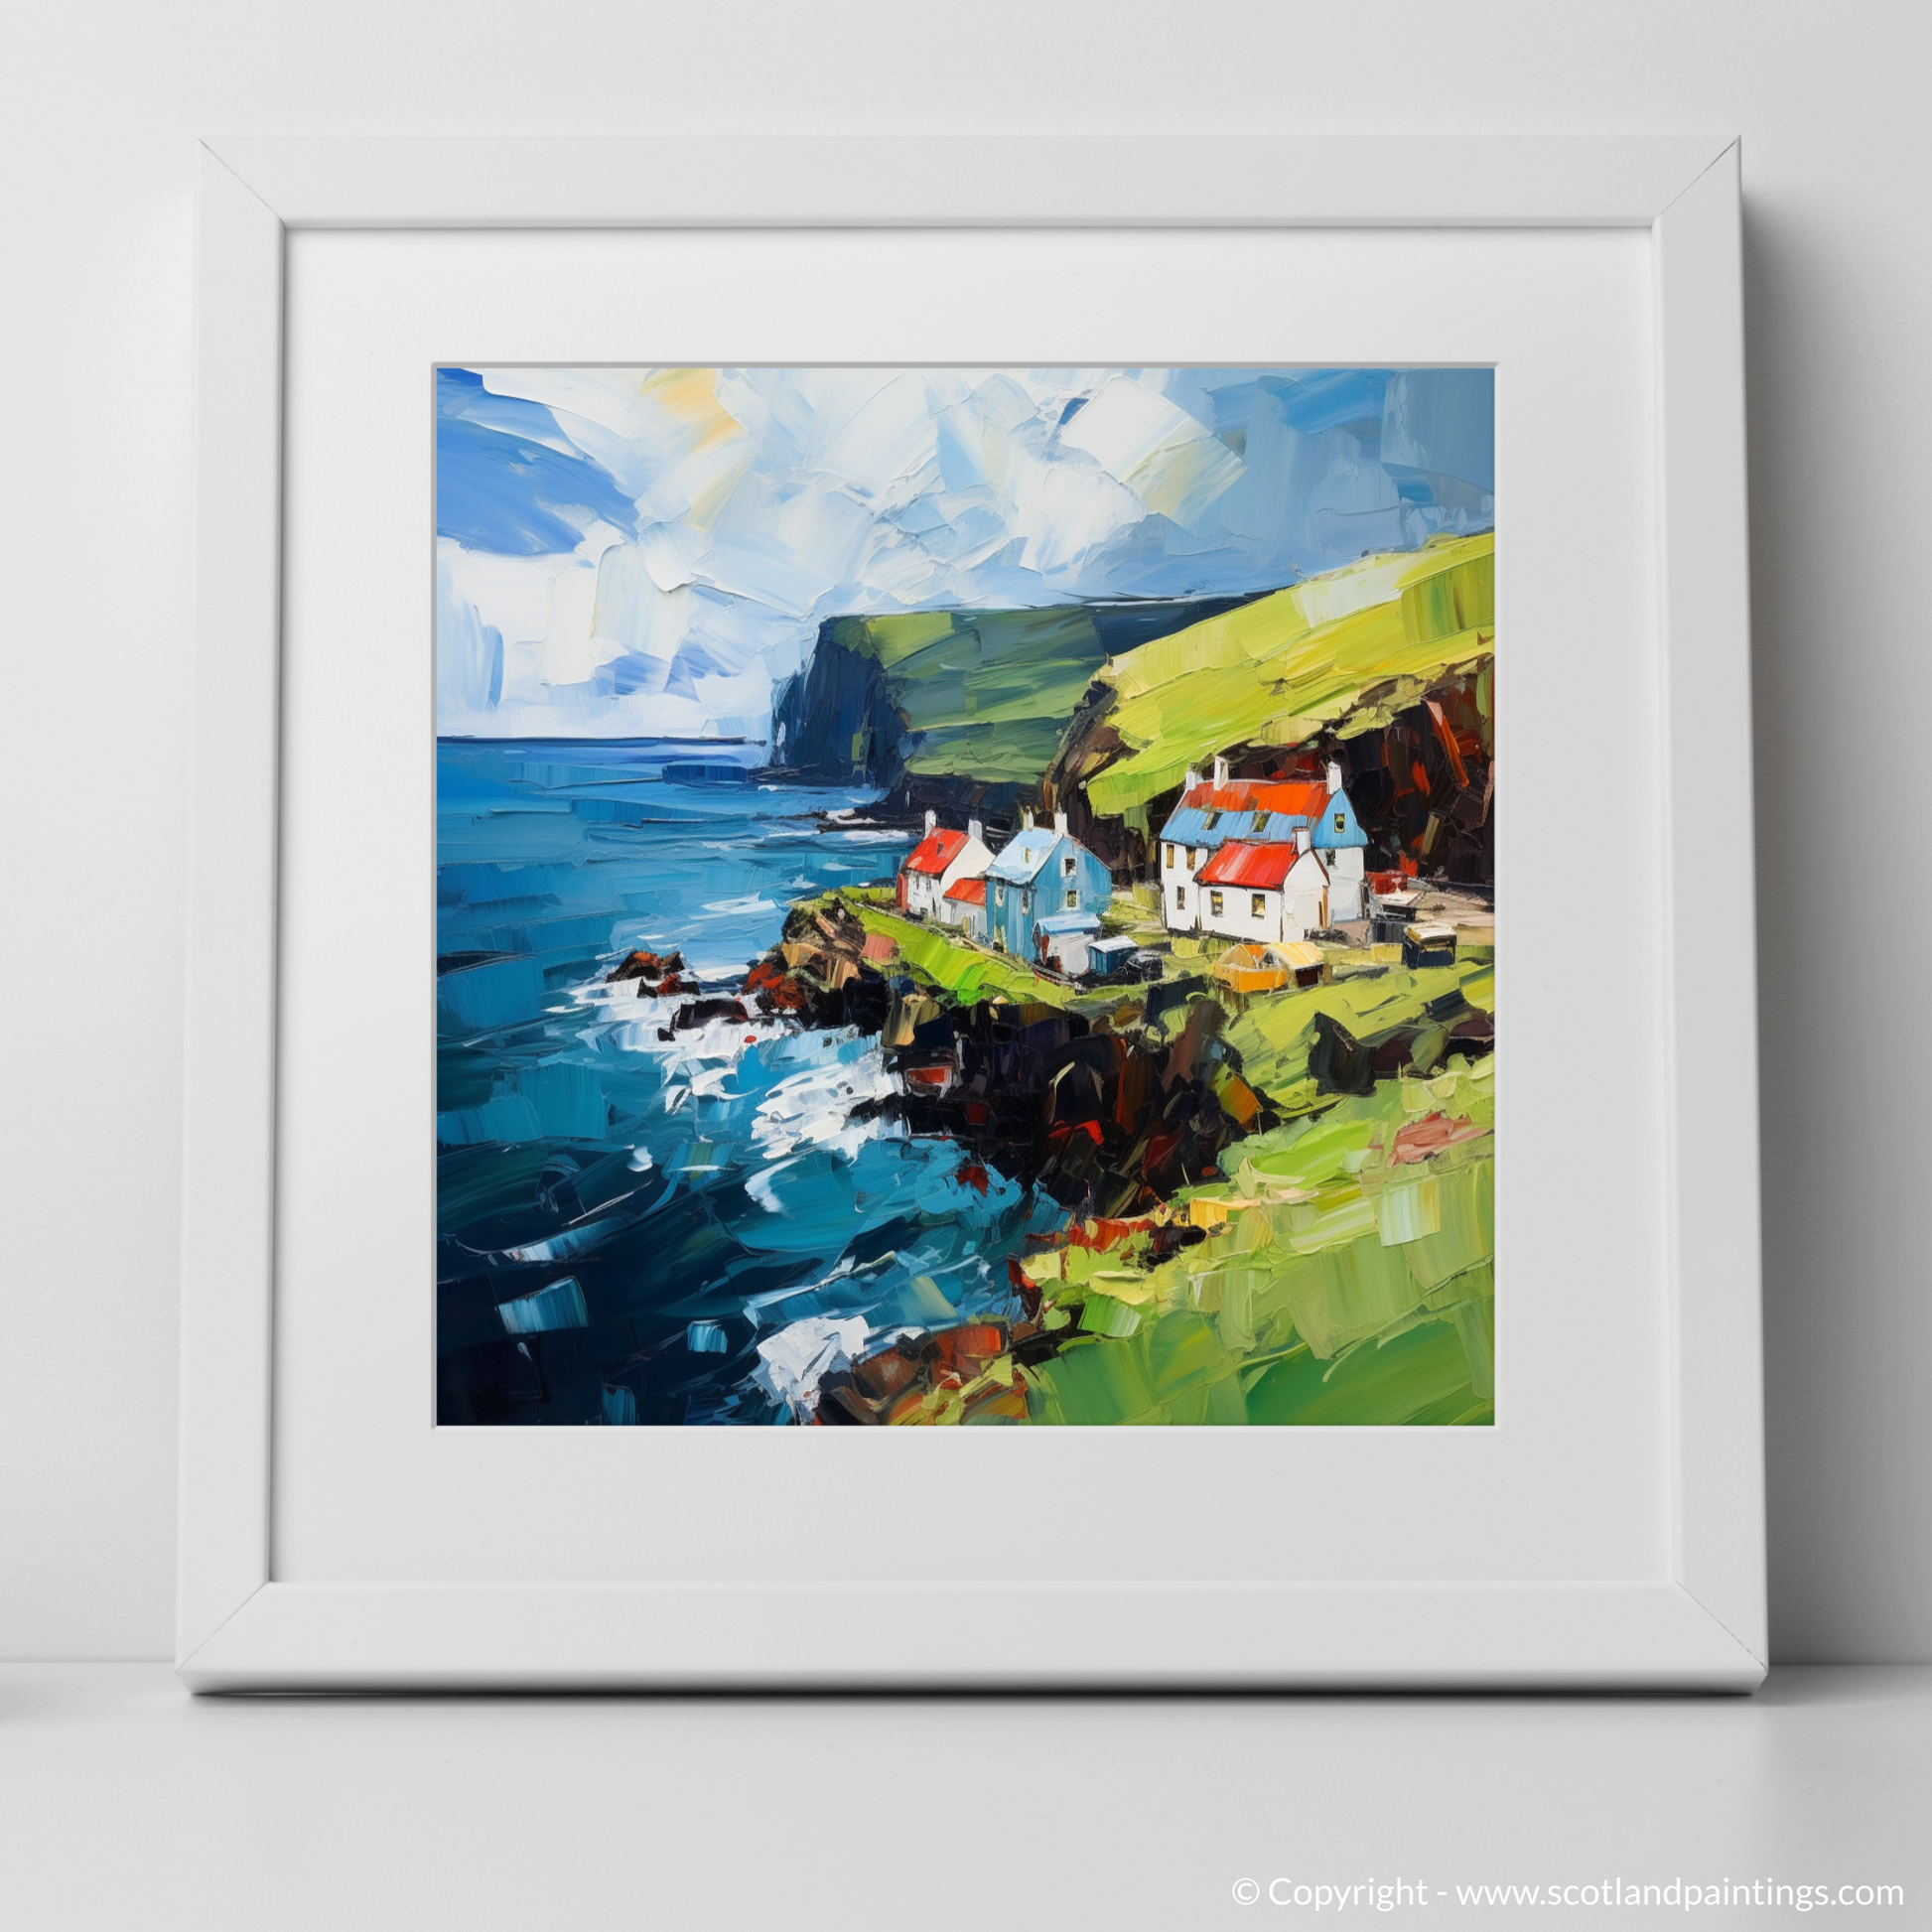 Art Print of Pennan Harbour, Aberdeenshire with a white frame